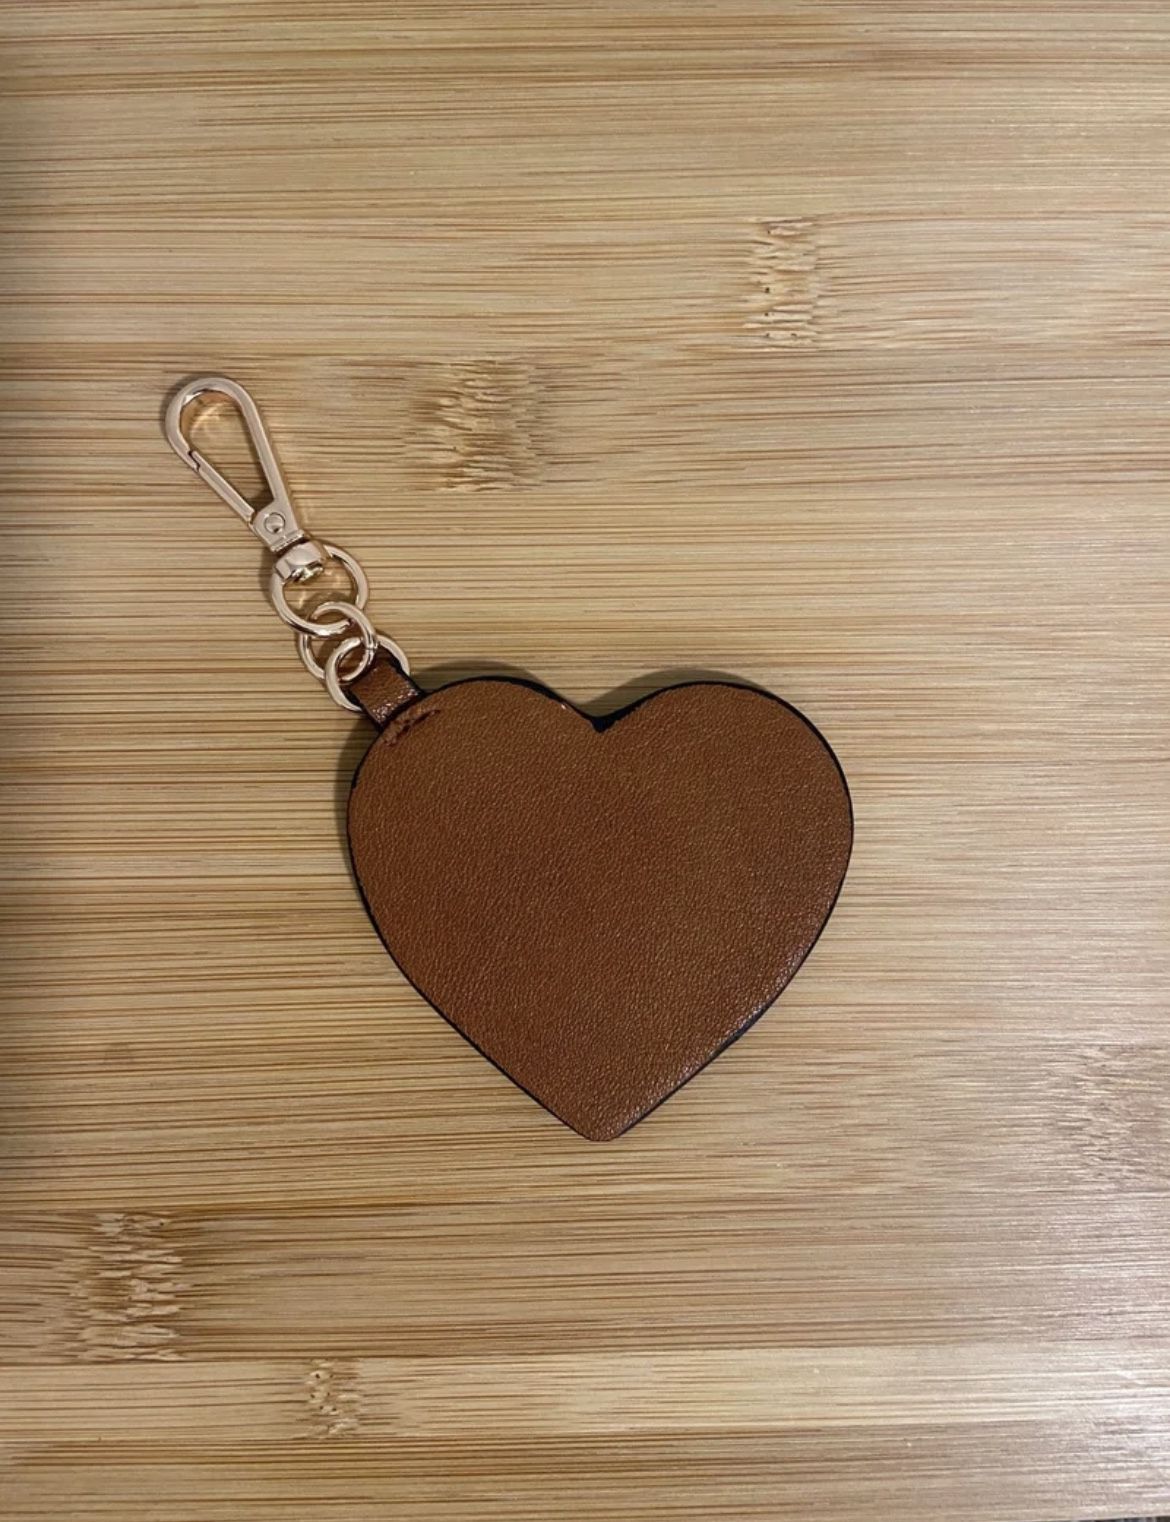 Faux leather heart keychain charm